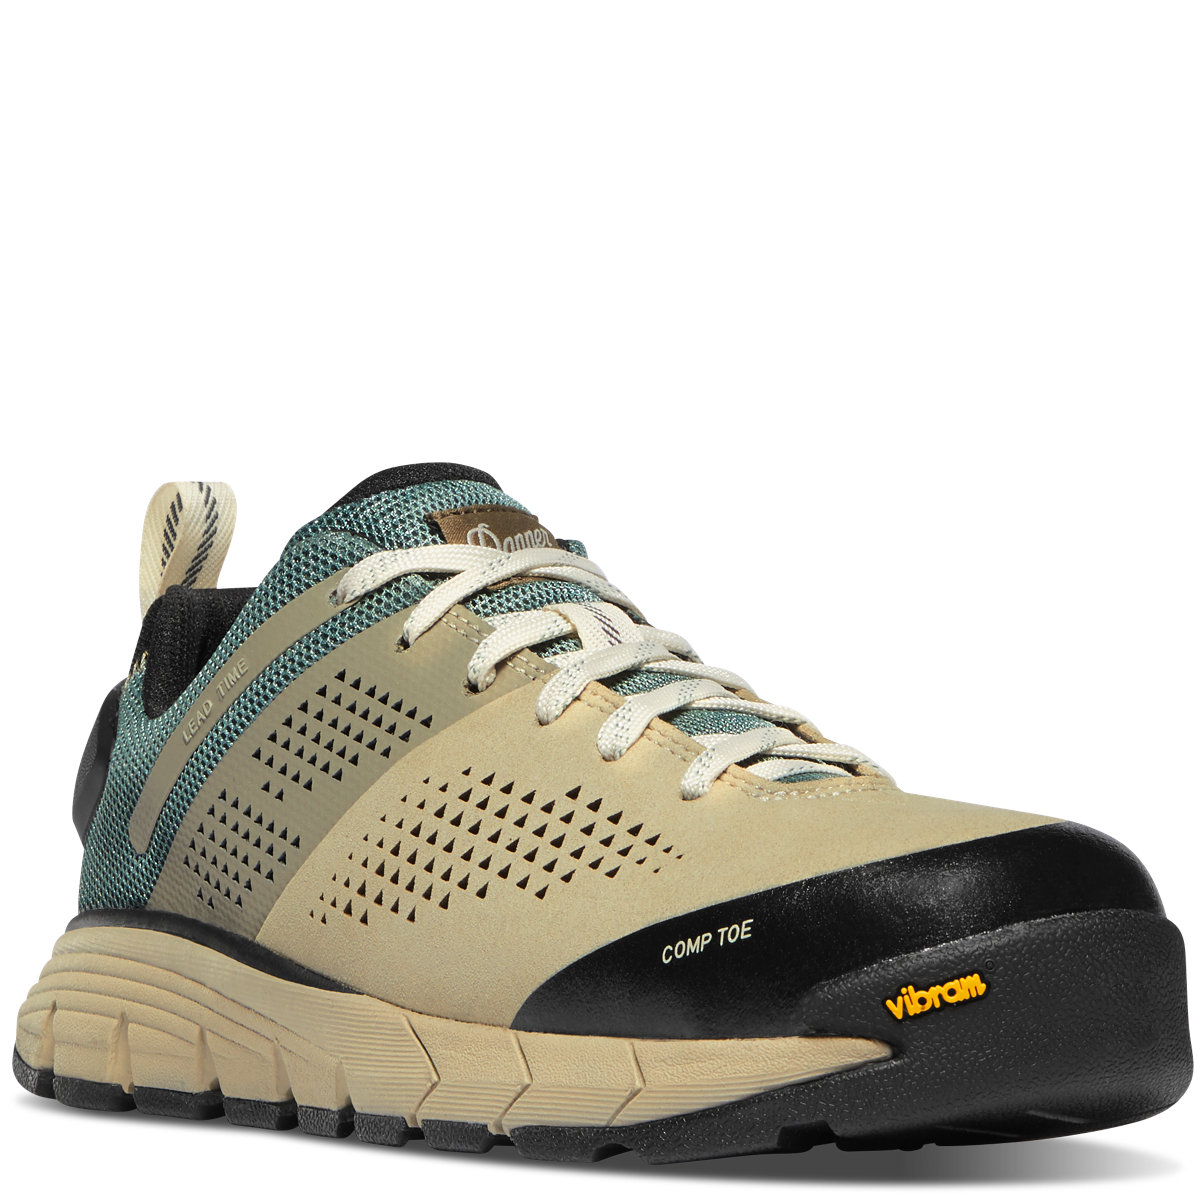 Danner - Lead Time Turquoise Composite Toe (NMT)